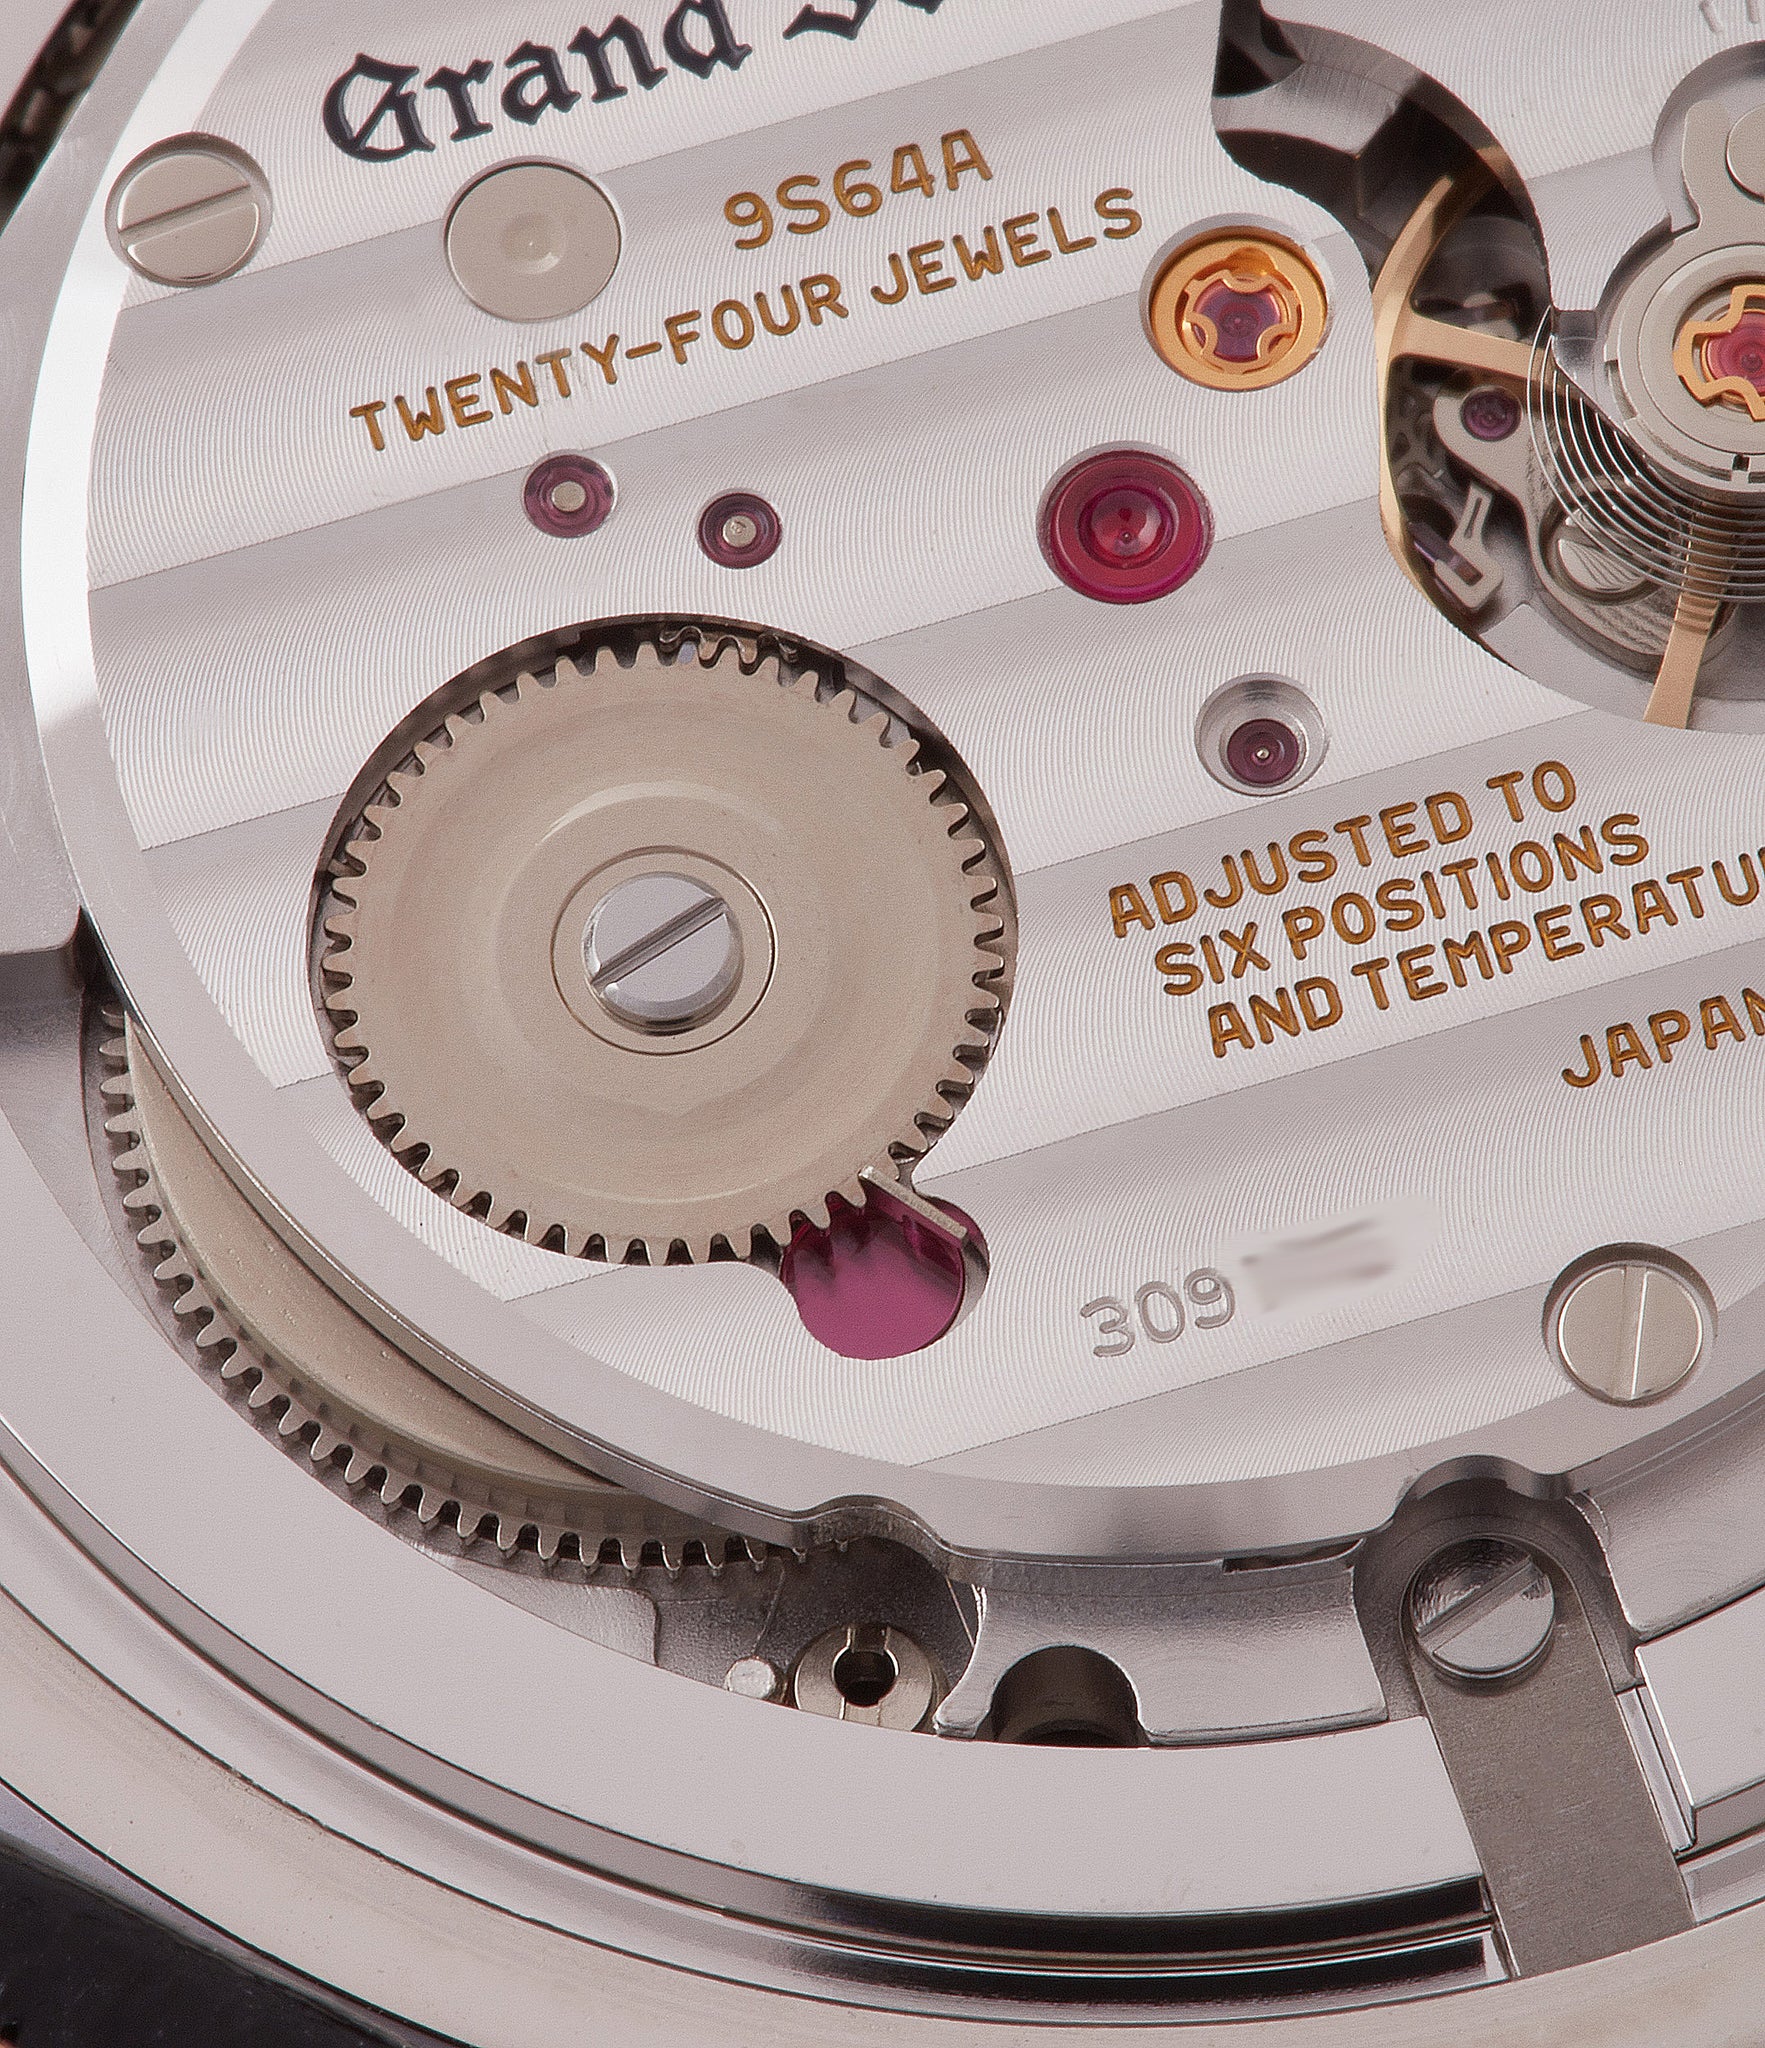 9S64 movement Grand Seiko SBGW251 limited edition platinum time-only dress watch Japanese-made full set at A Collected Man London UK specialist of rare watches